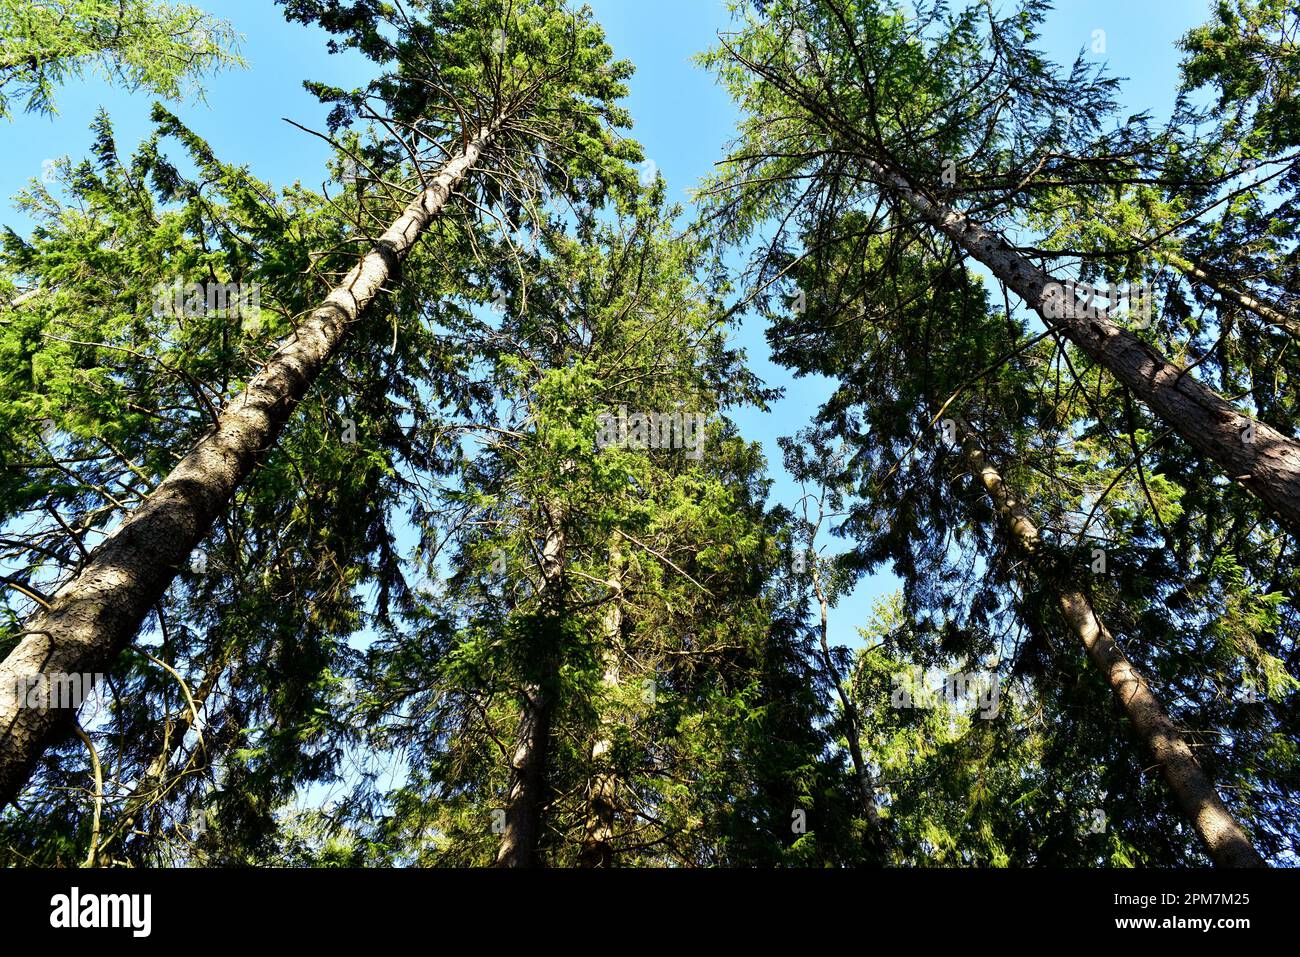 European spruce or Norway spruce (Picea abies) is an evergreen tree native to north and central Europe. This photo was taken in Munkedal, Sweden. Stock Photo